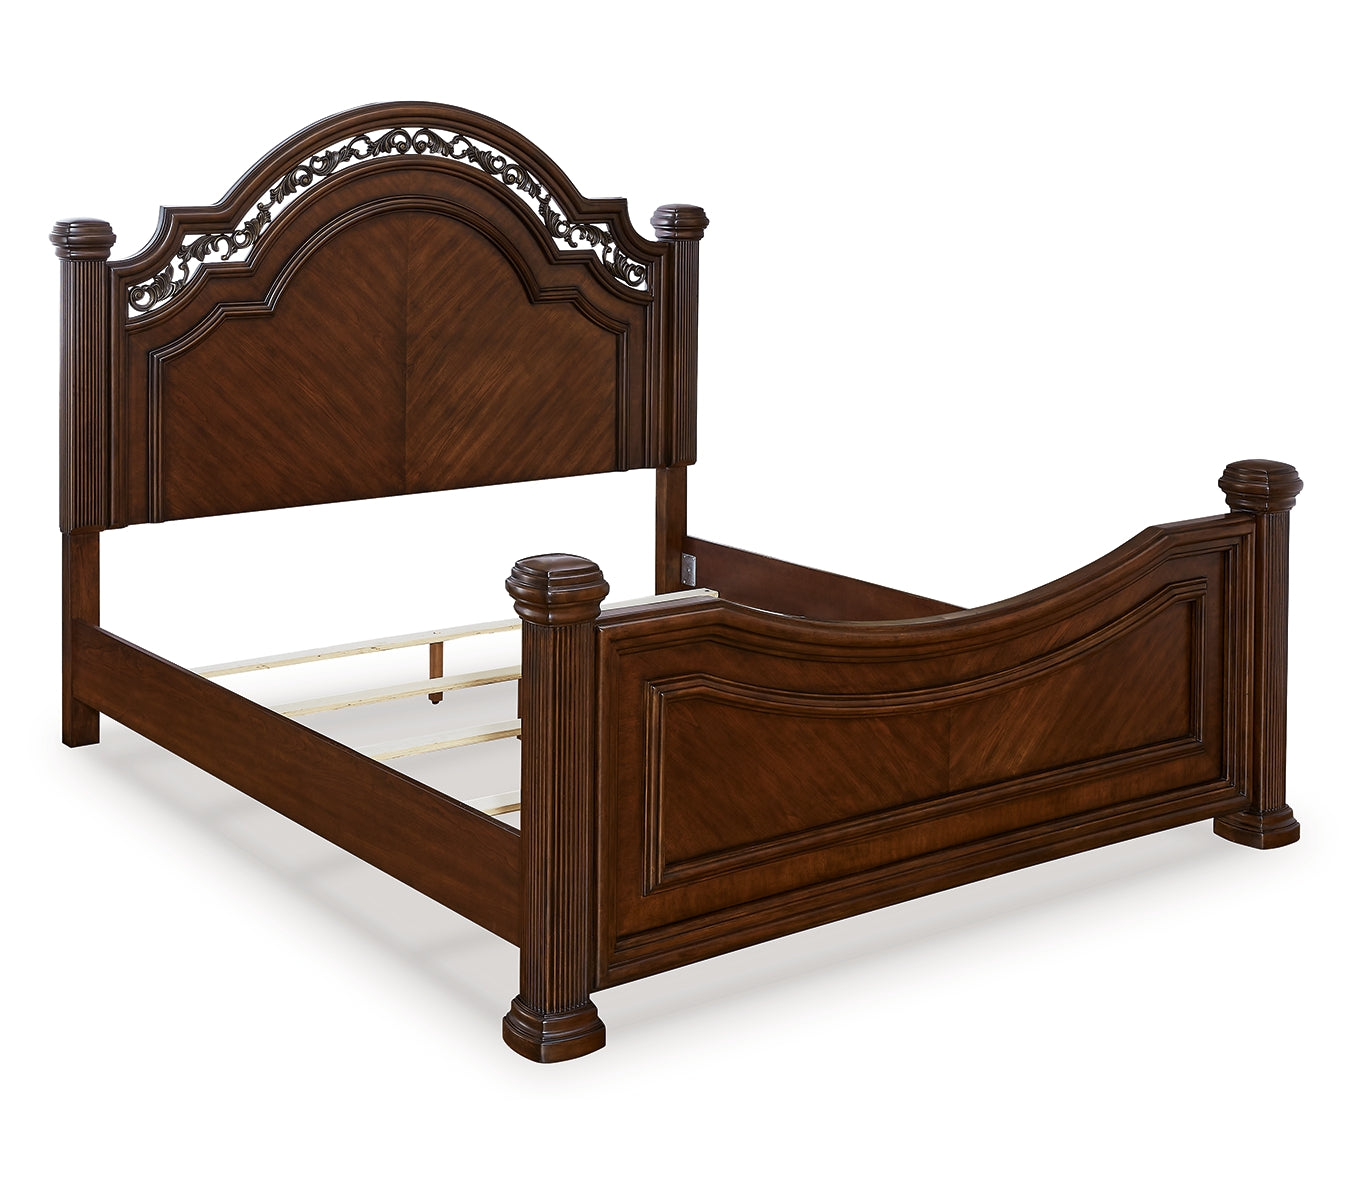 Lavinton King Poster Bed